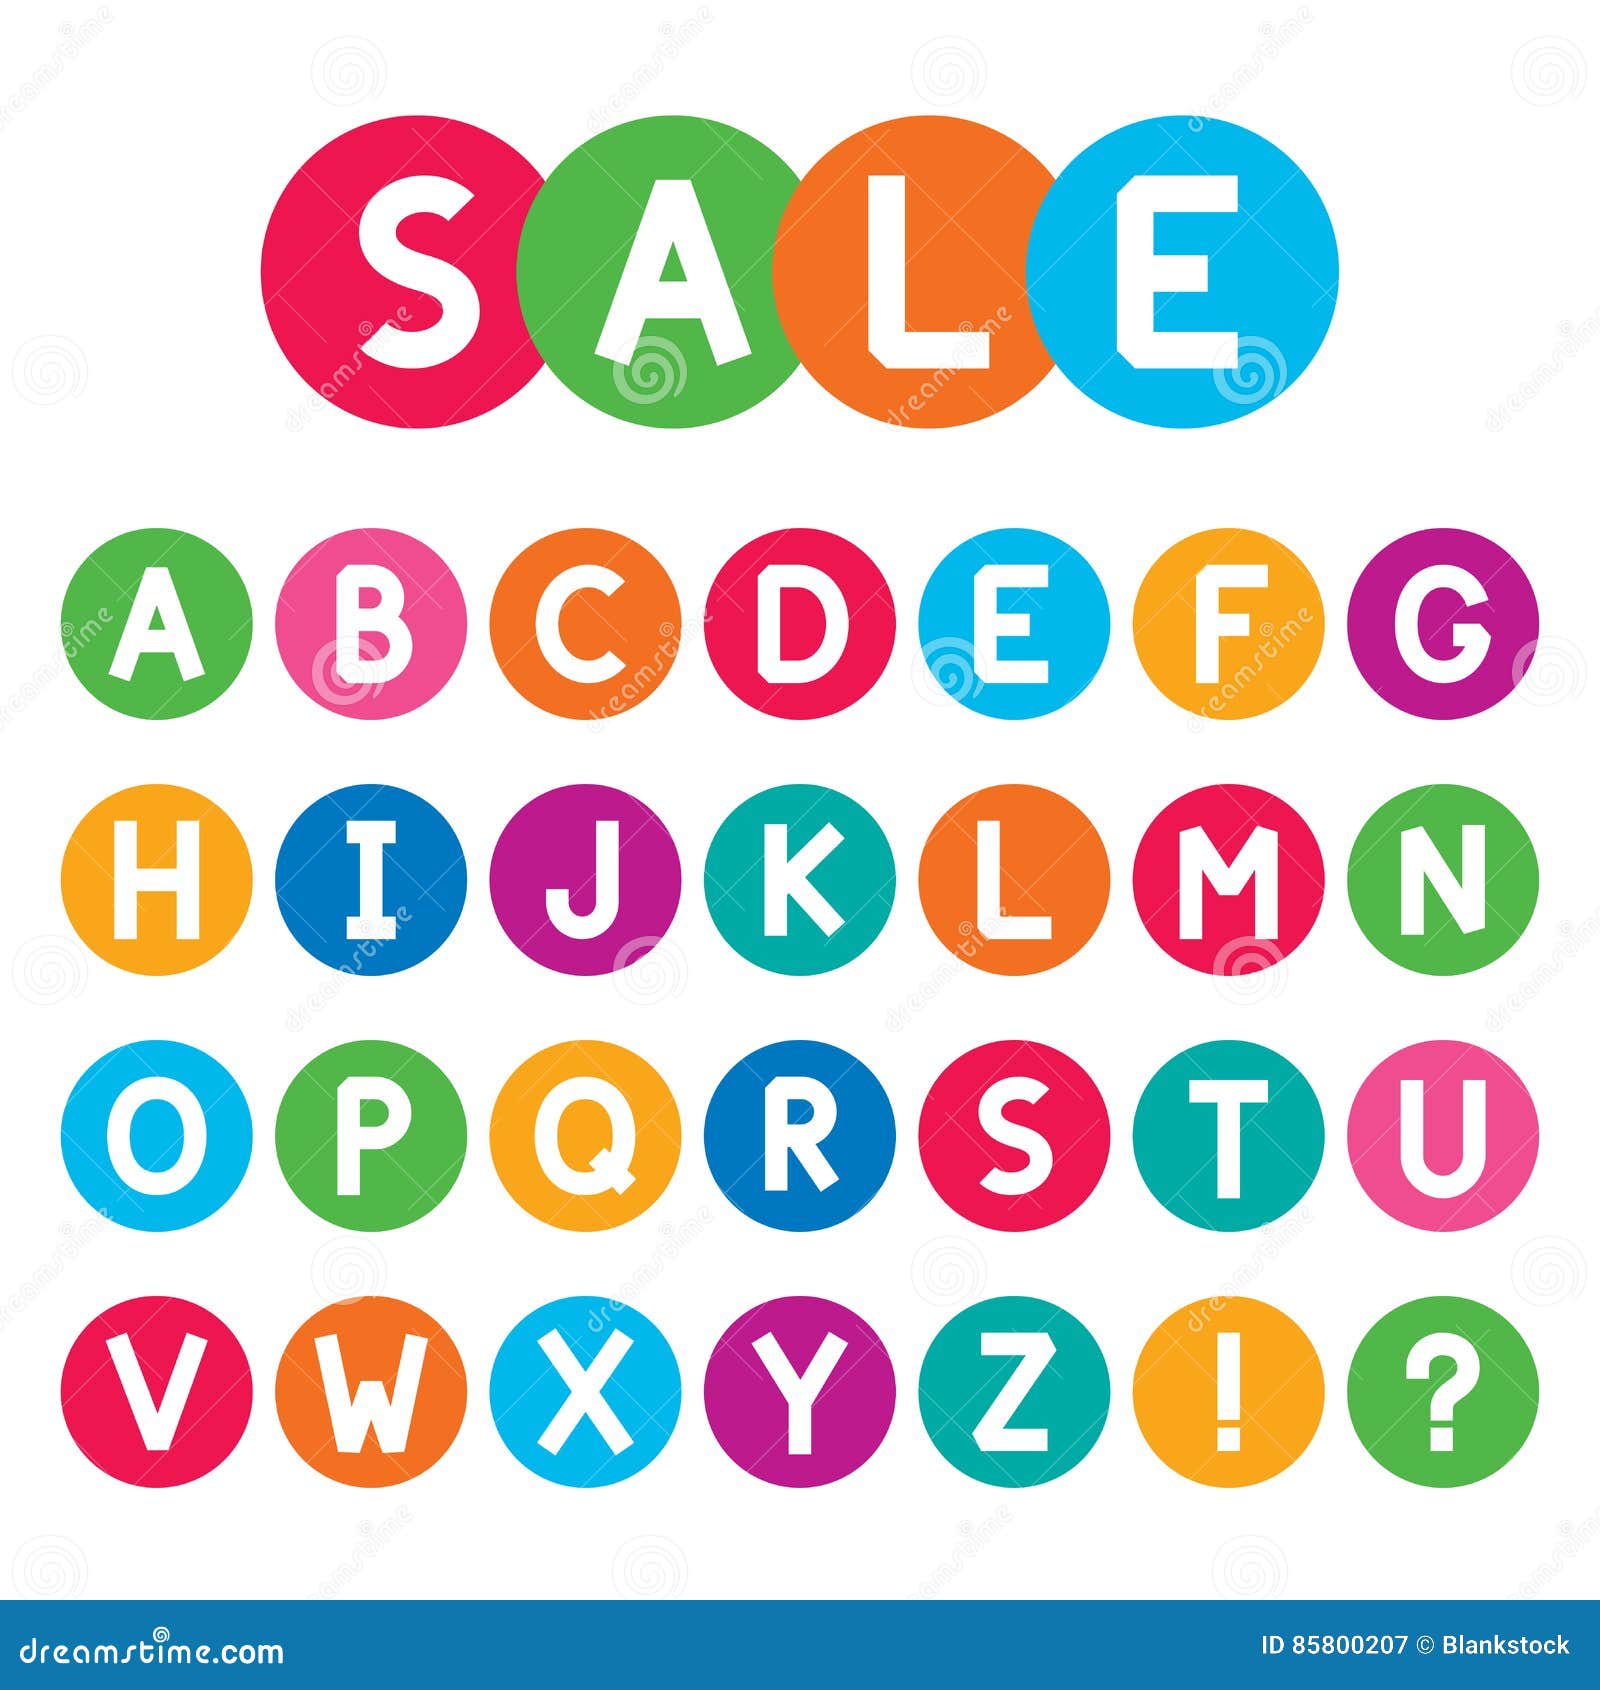 circle letters stock illustrations 102 679 circle letters stock illustrations vectors clipart dreamstime